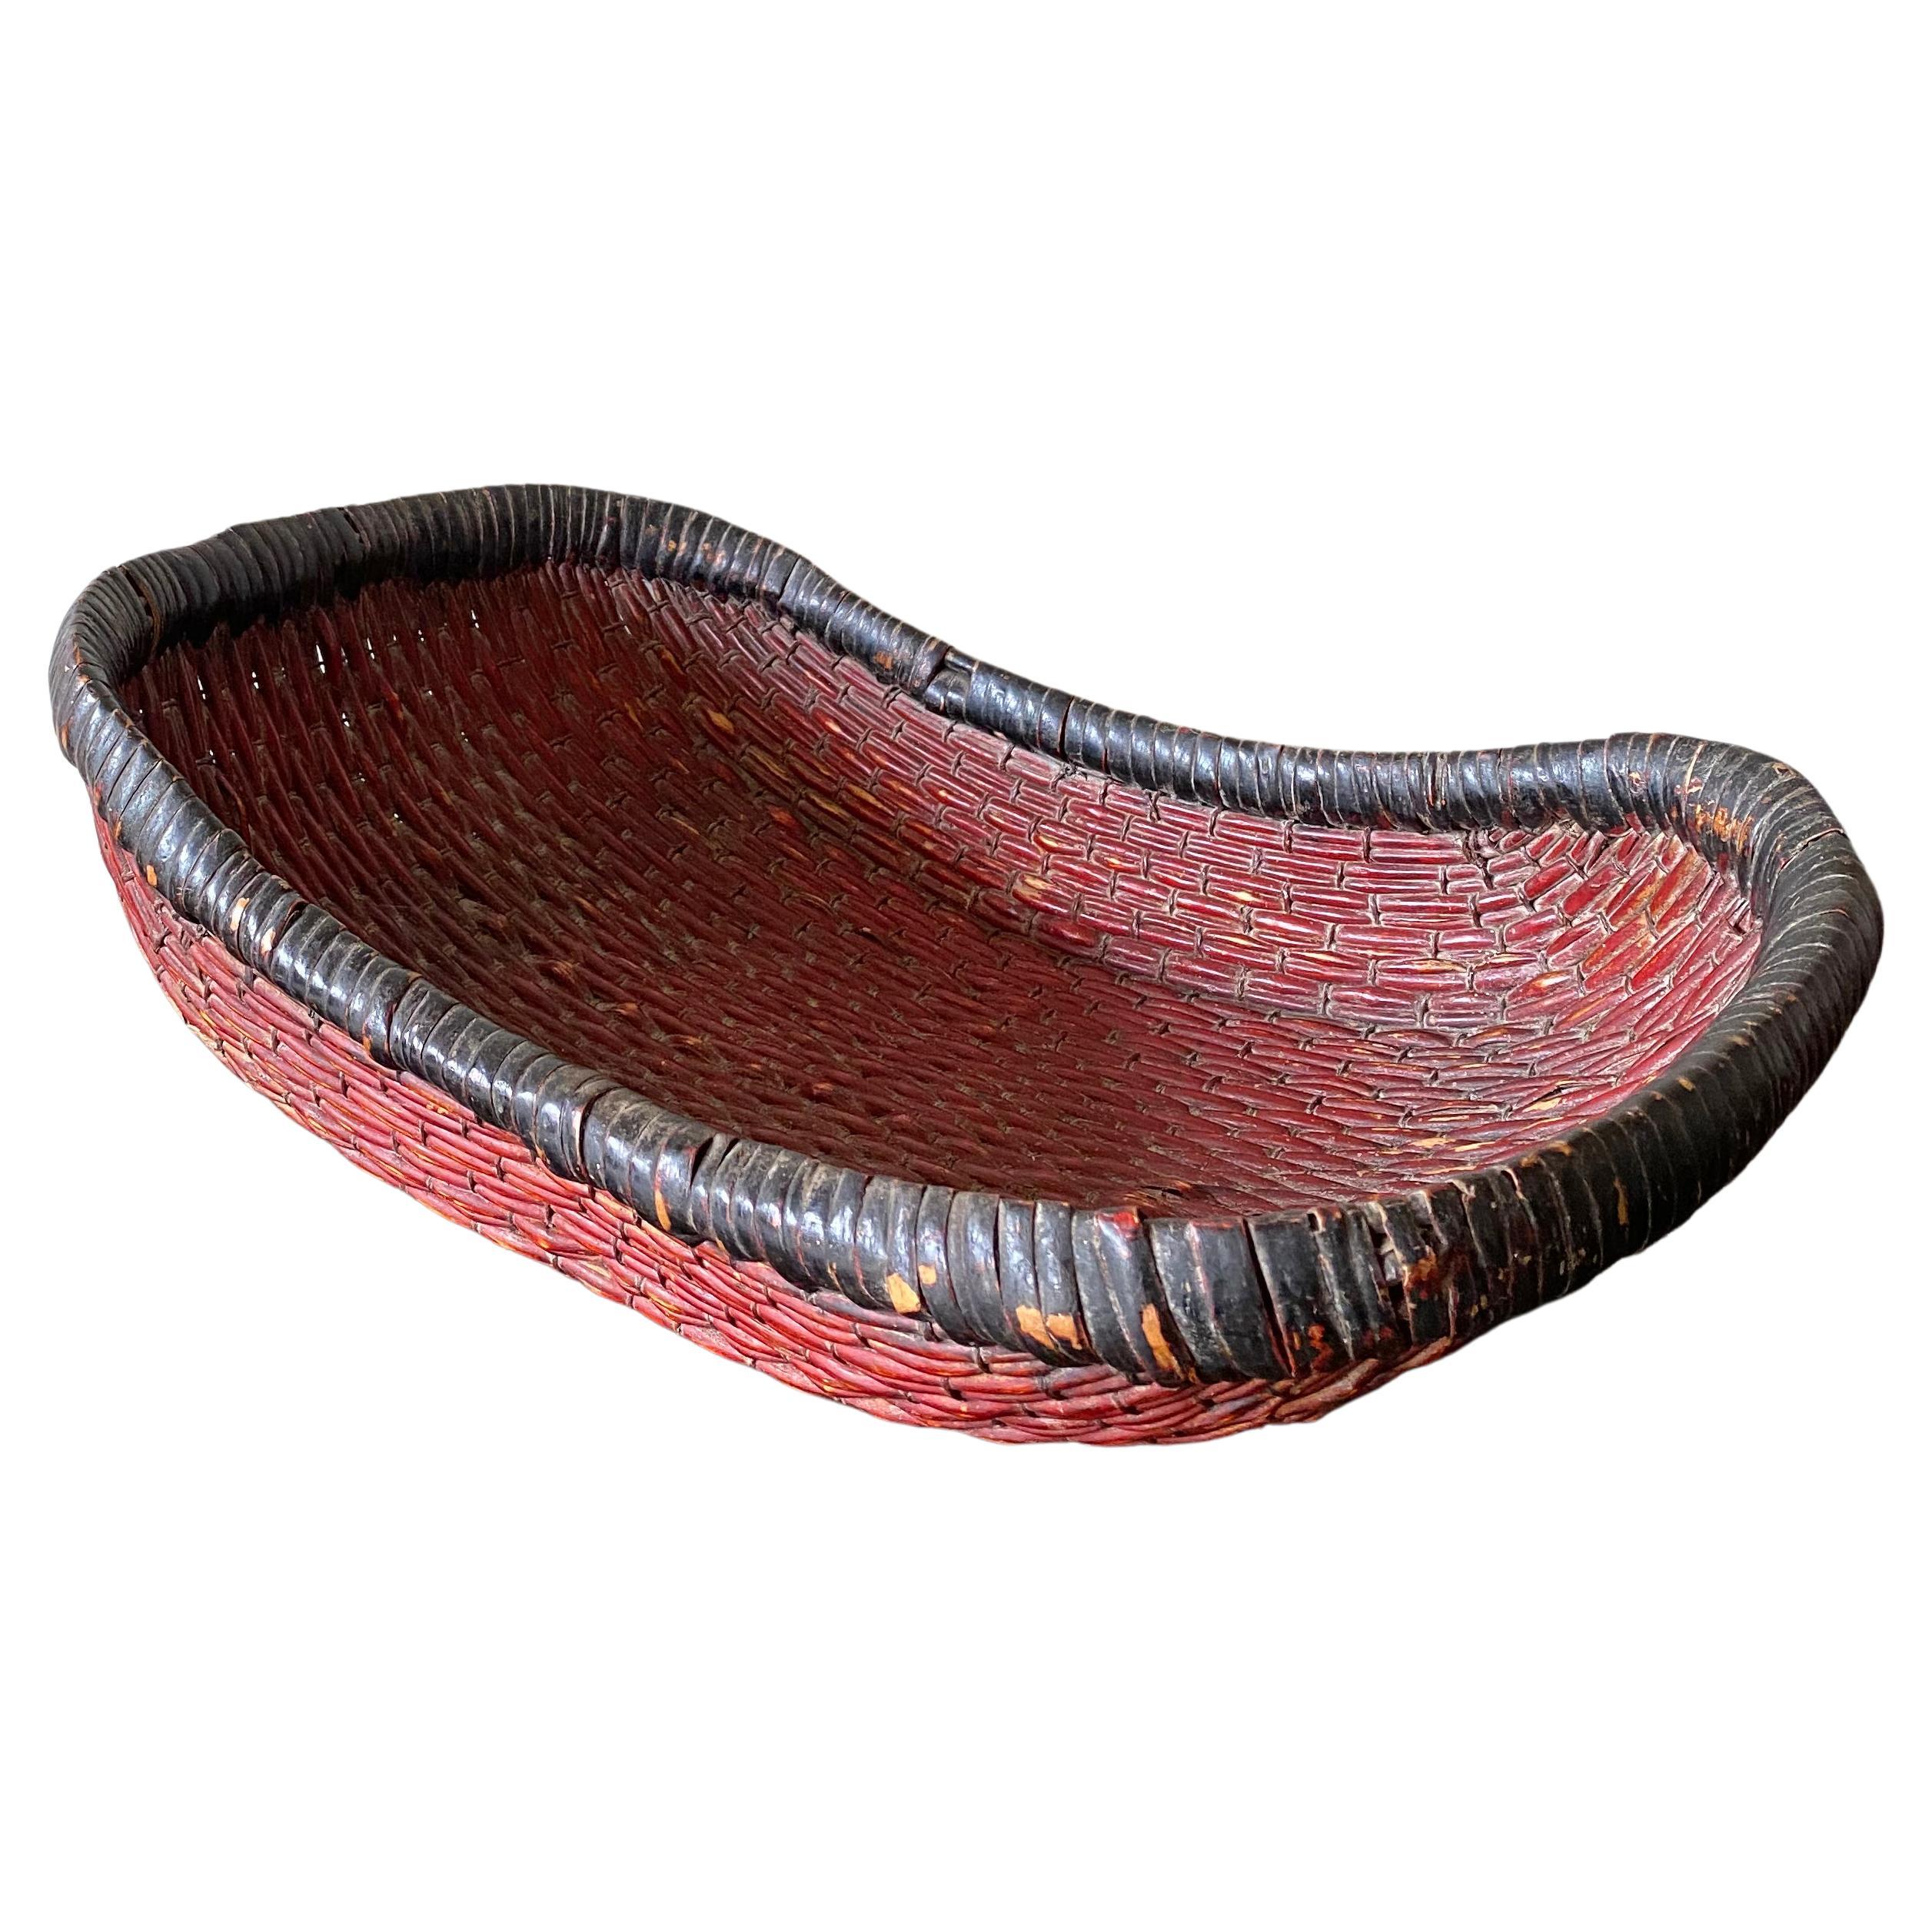 Chinese Red Painted Reed Basket, "Mantou" Basket, Early 20th Century